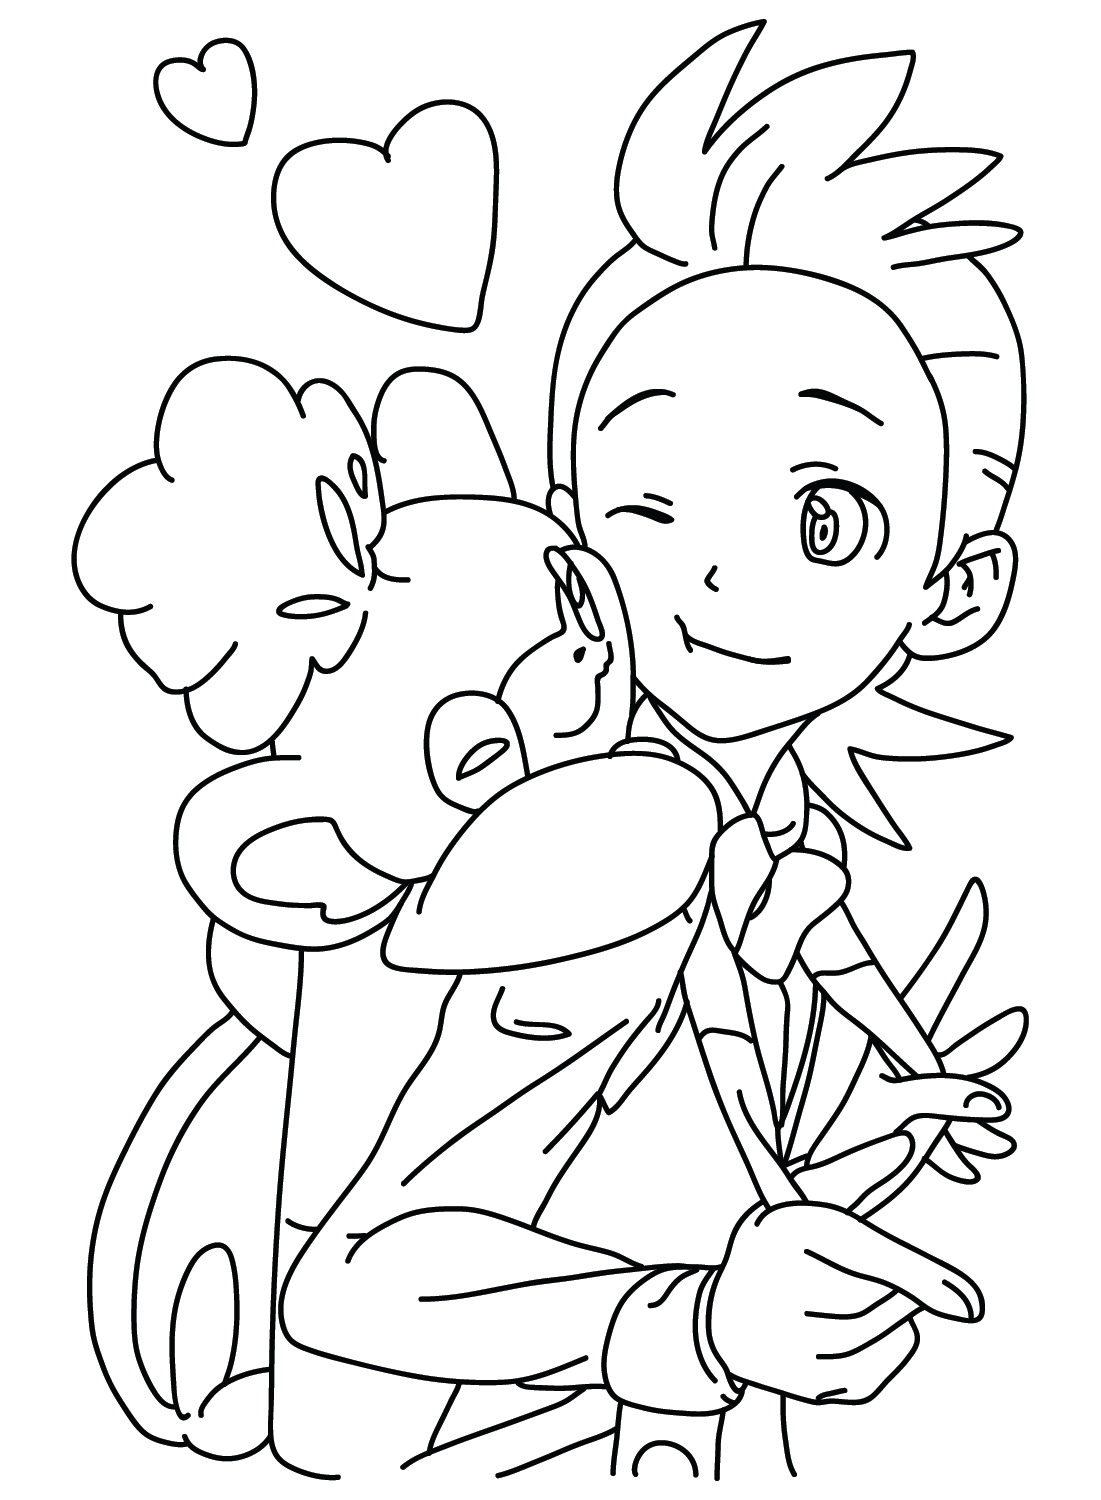 Cilan Pokemon Coloring Pages to Print from Cilan Pokemon